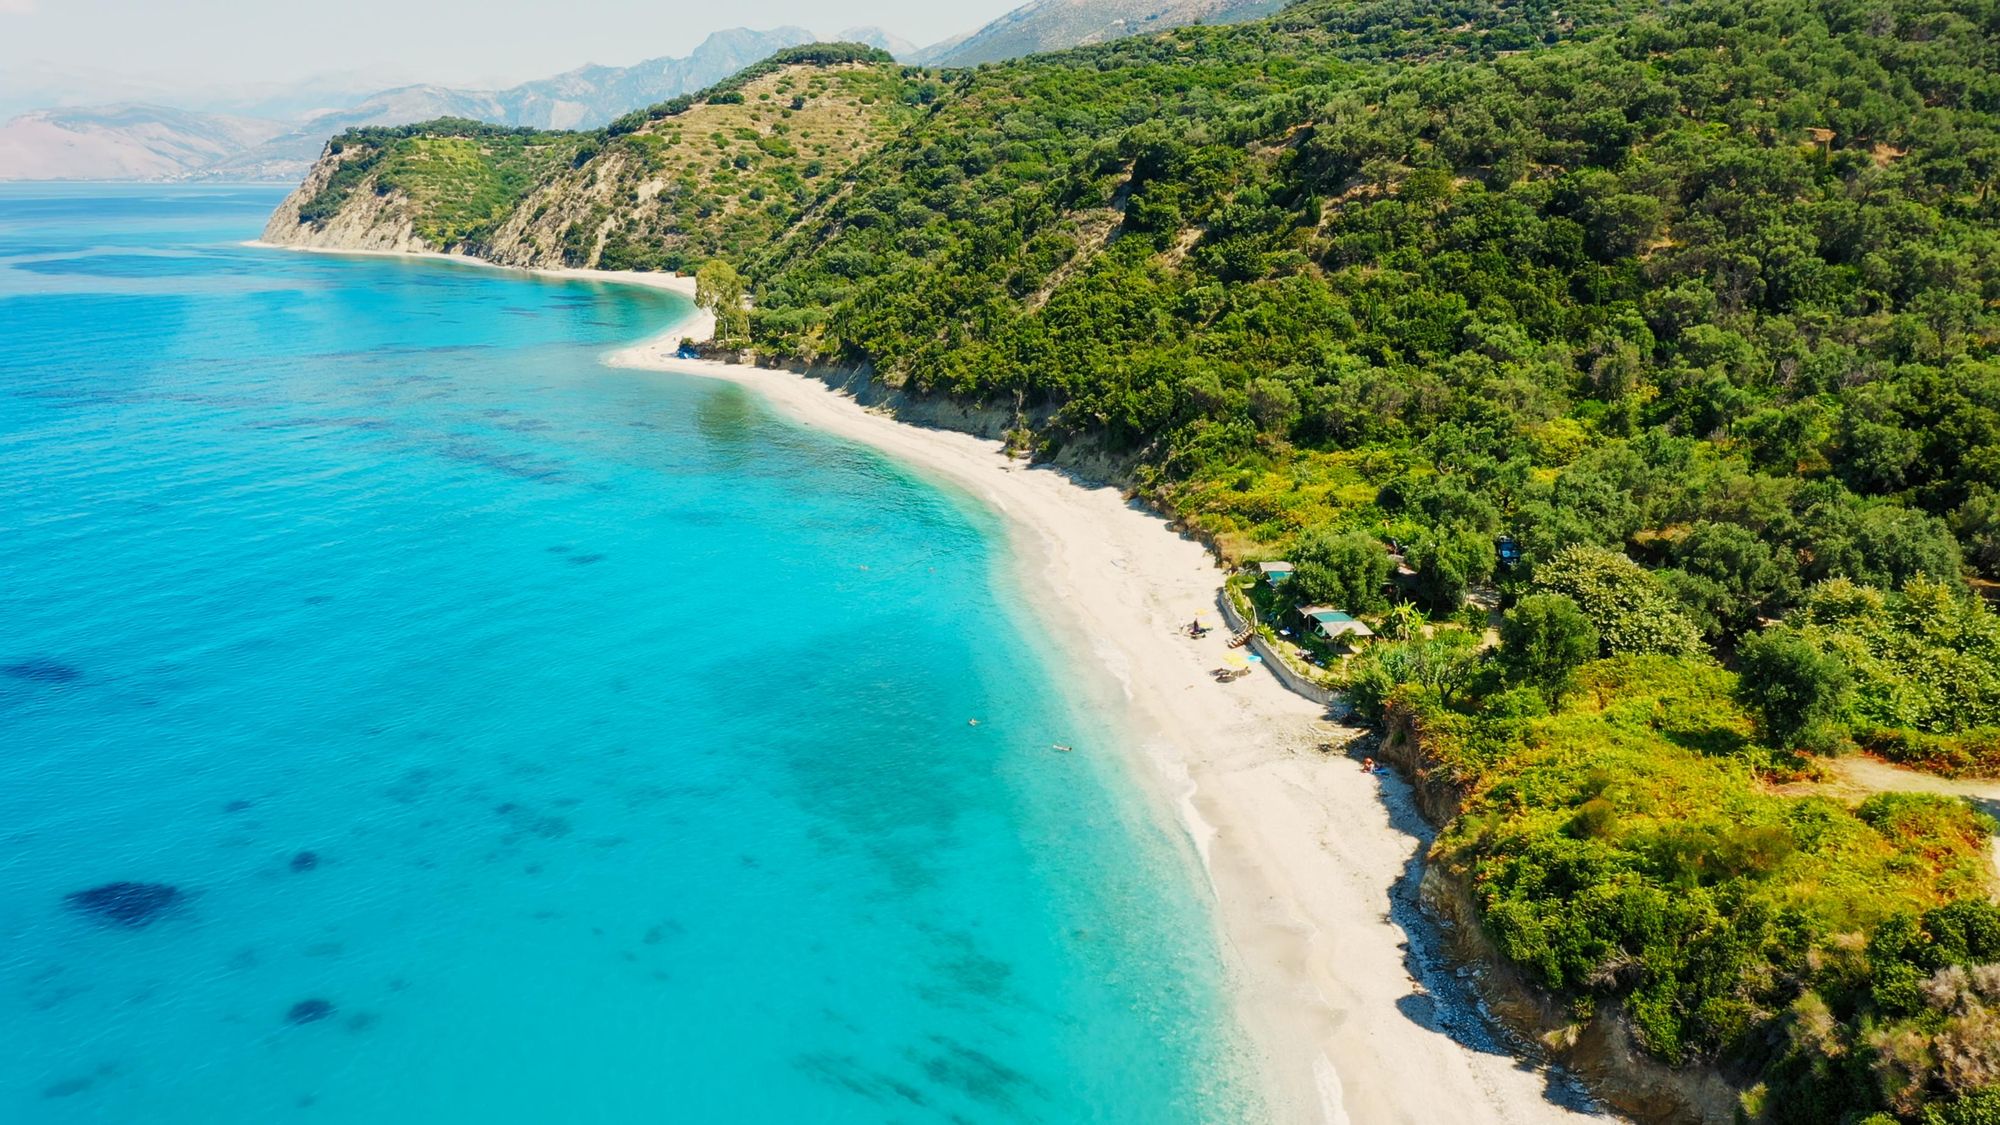 The lush greenery and perfect waters of the Albanian coast. Photo: Getty